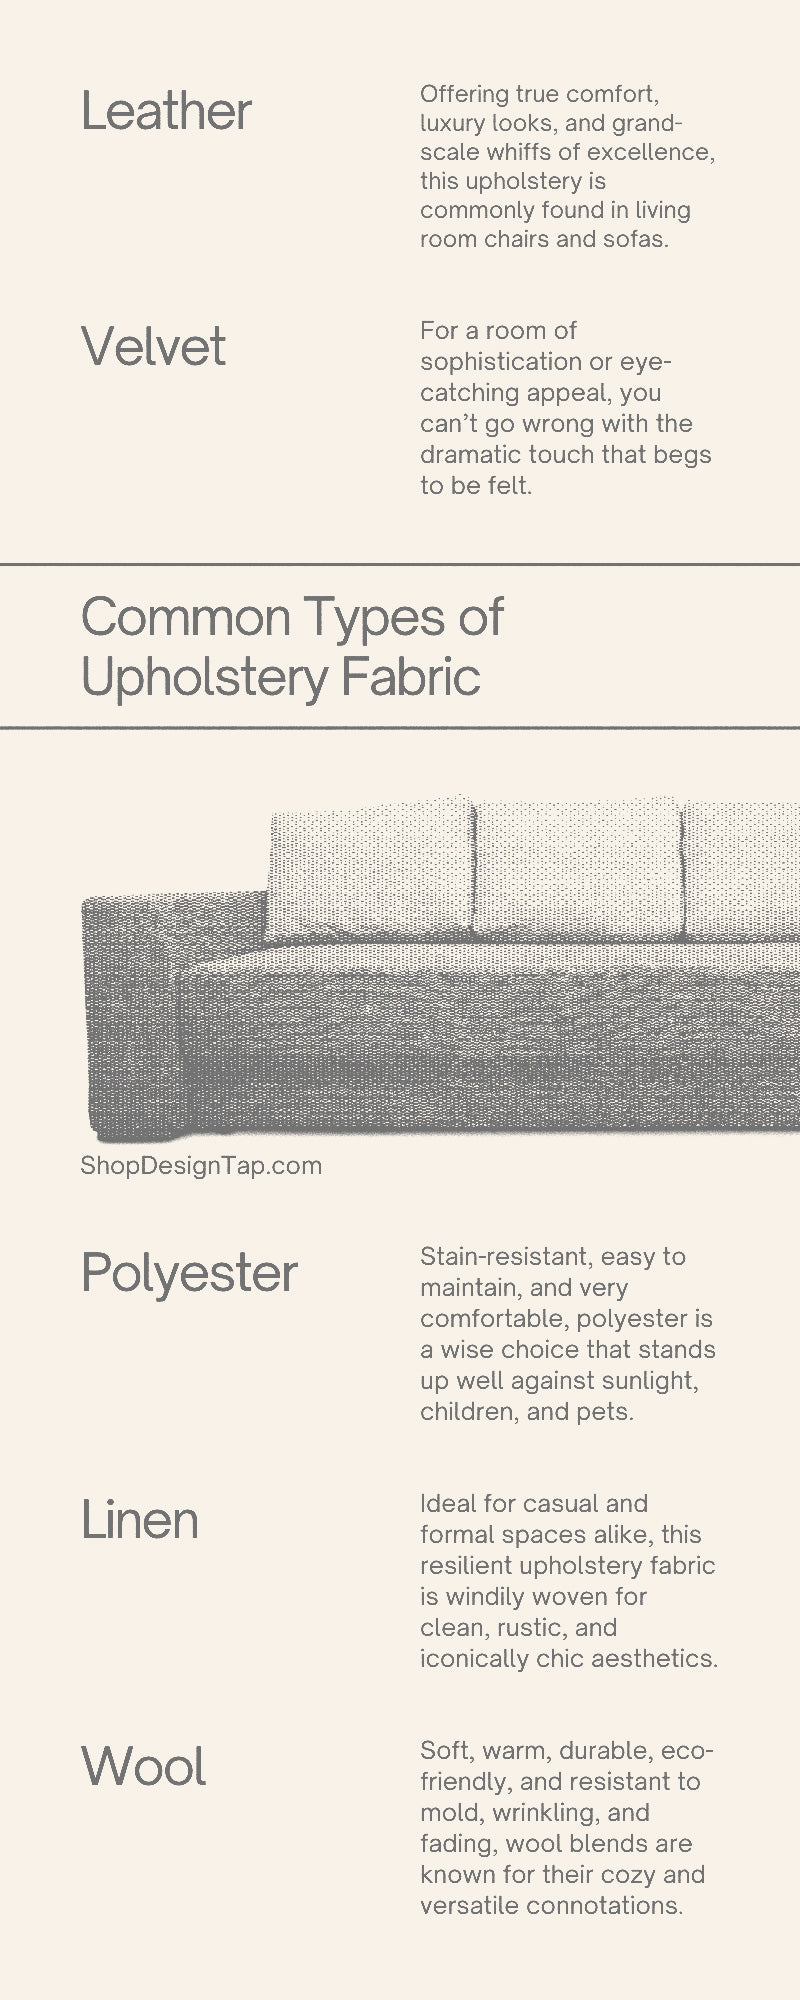 Common Types of Upholstery Fabric and How To Select the Right One